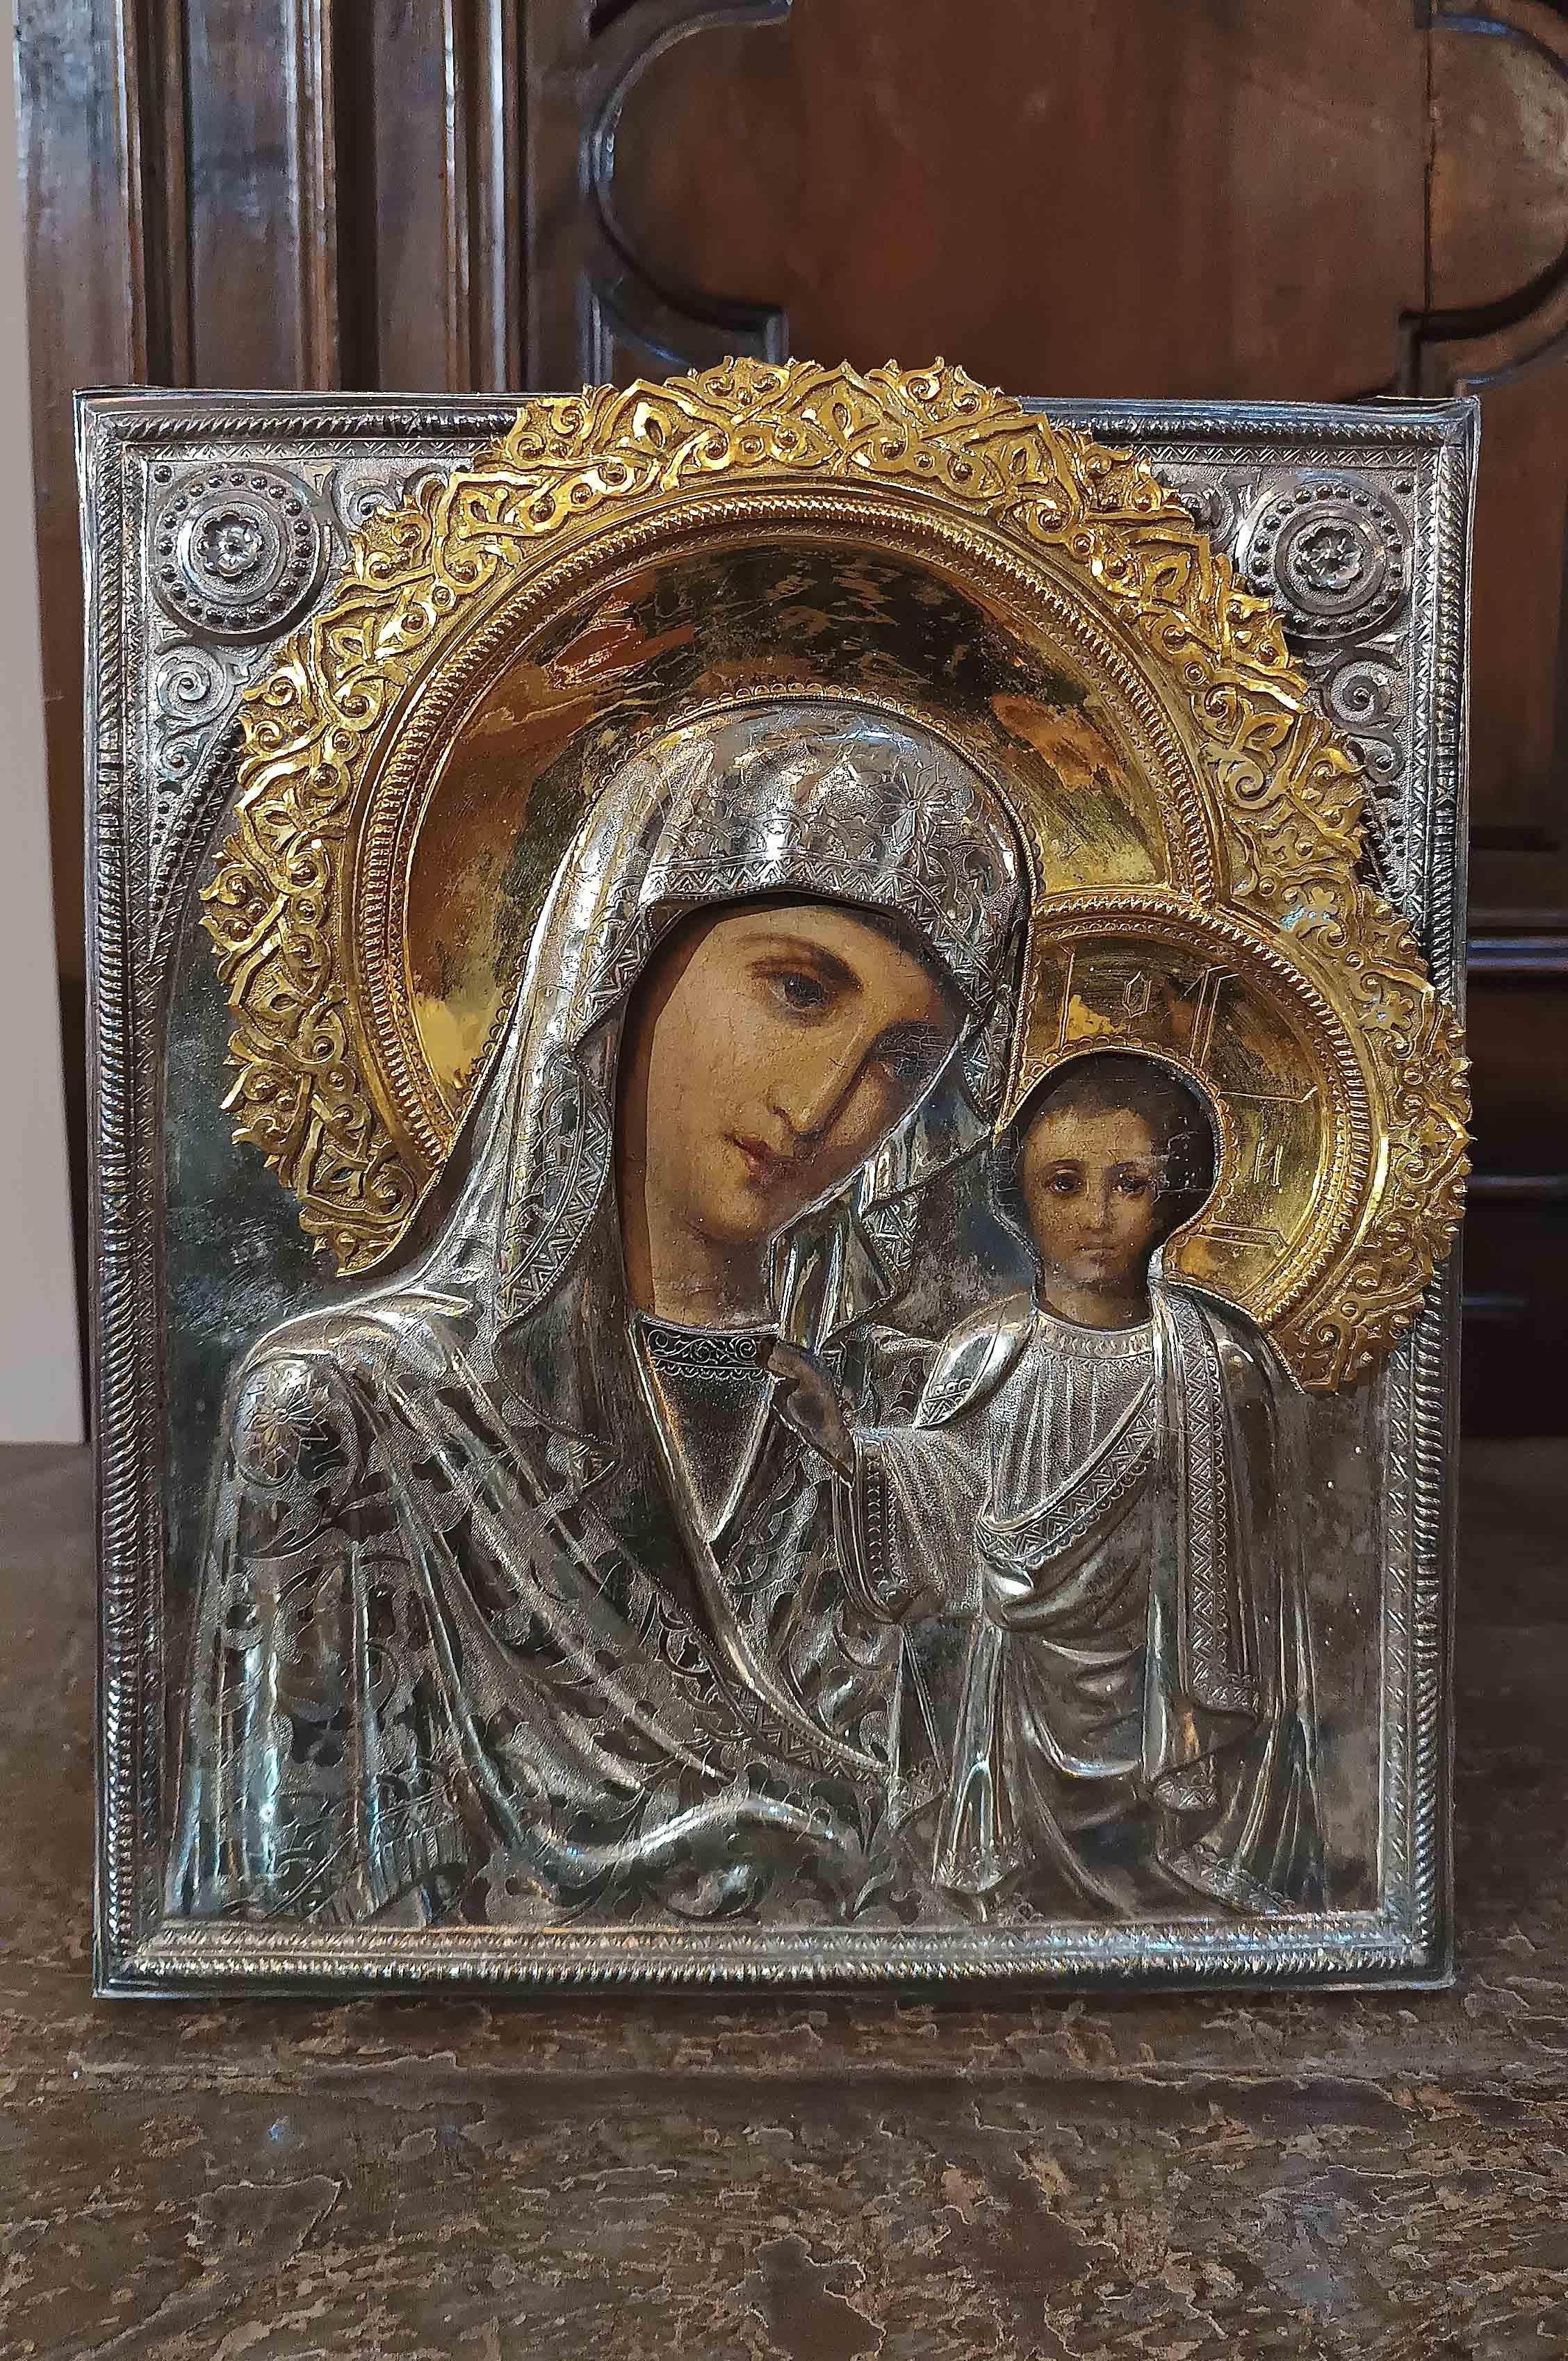 Beautiful icon painted in oil on a tablet with a silver frame and gilded silver haloes. The representation of the Madonna and child is frontal, with intense and expressive gazes. Their clothes are richly decorated in silver, engraved creating